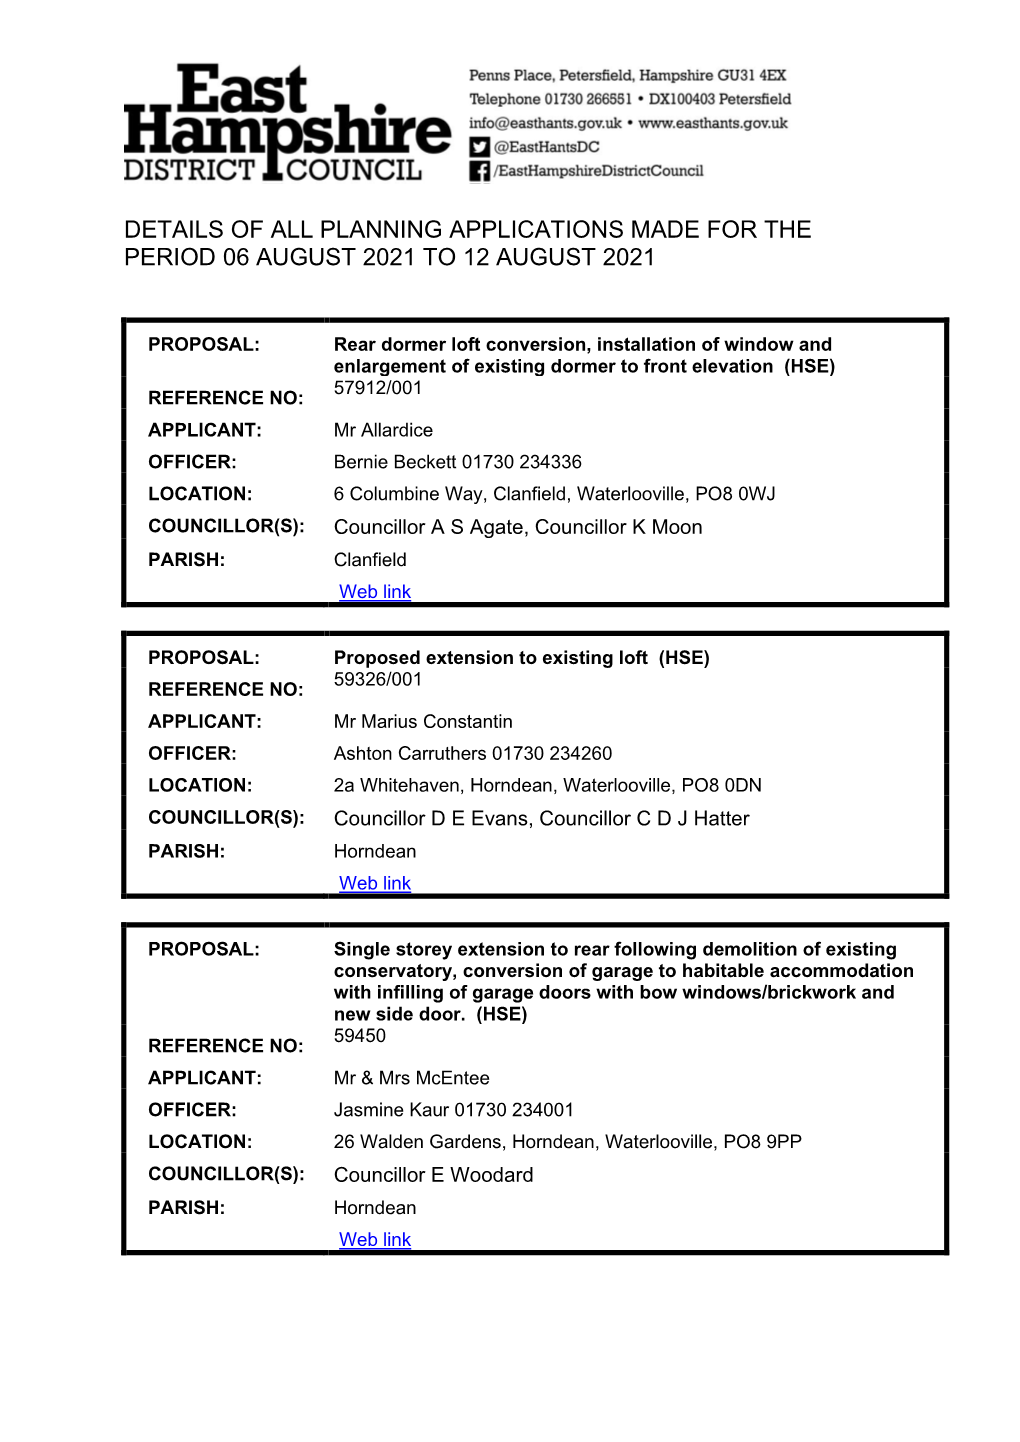 Details of All Planning Applications Made for the Period 06 August 2021 to 12 August 2021